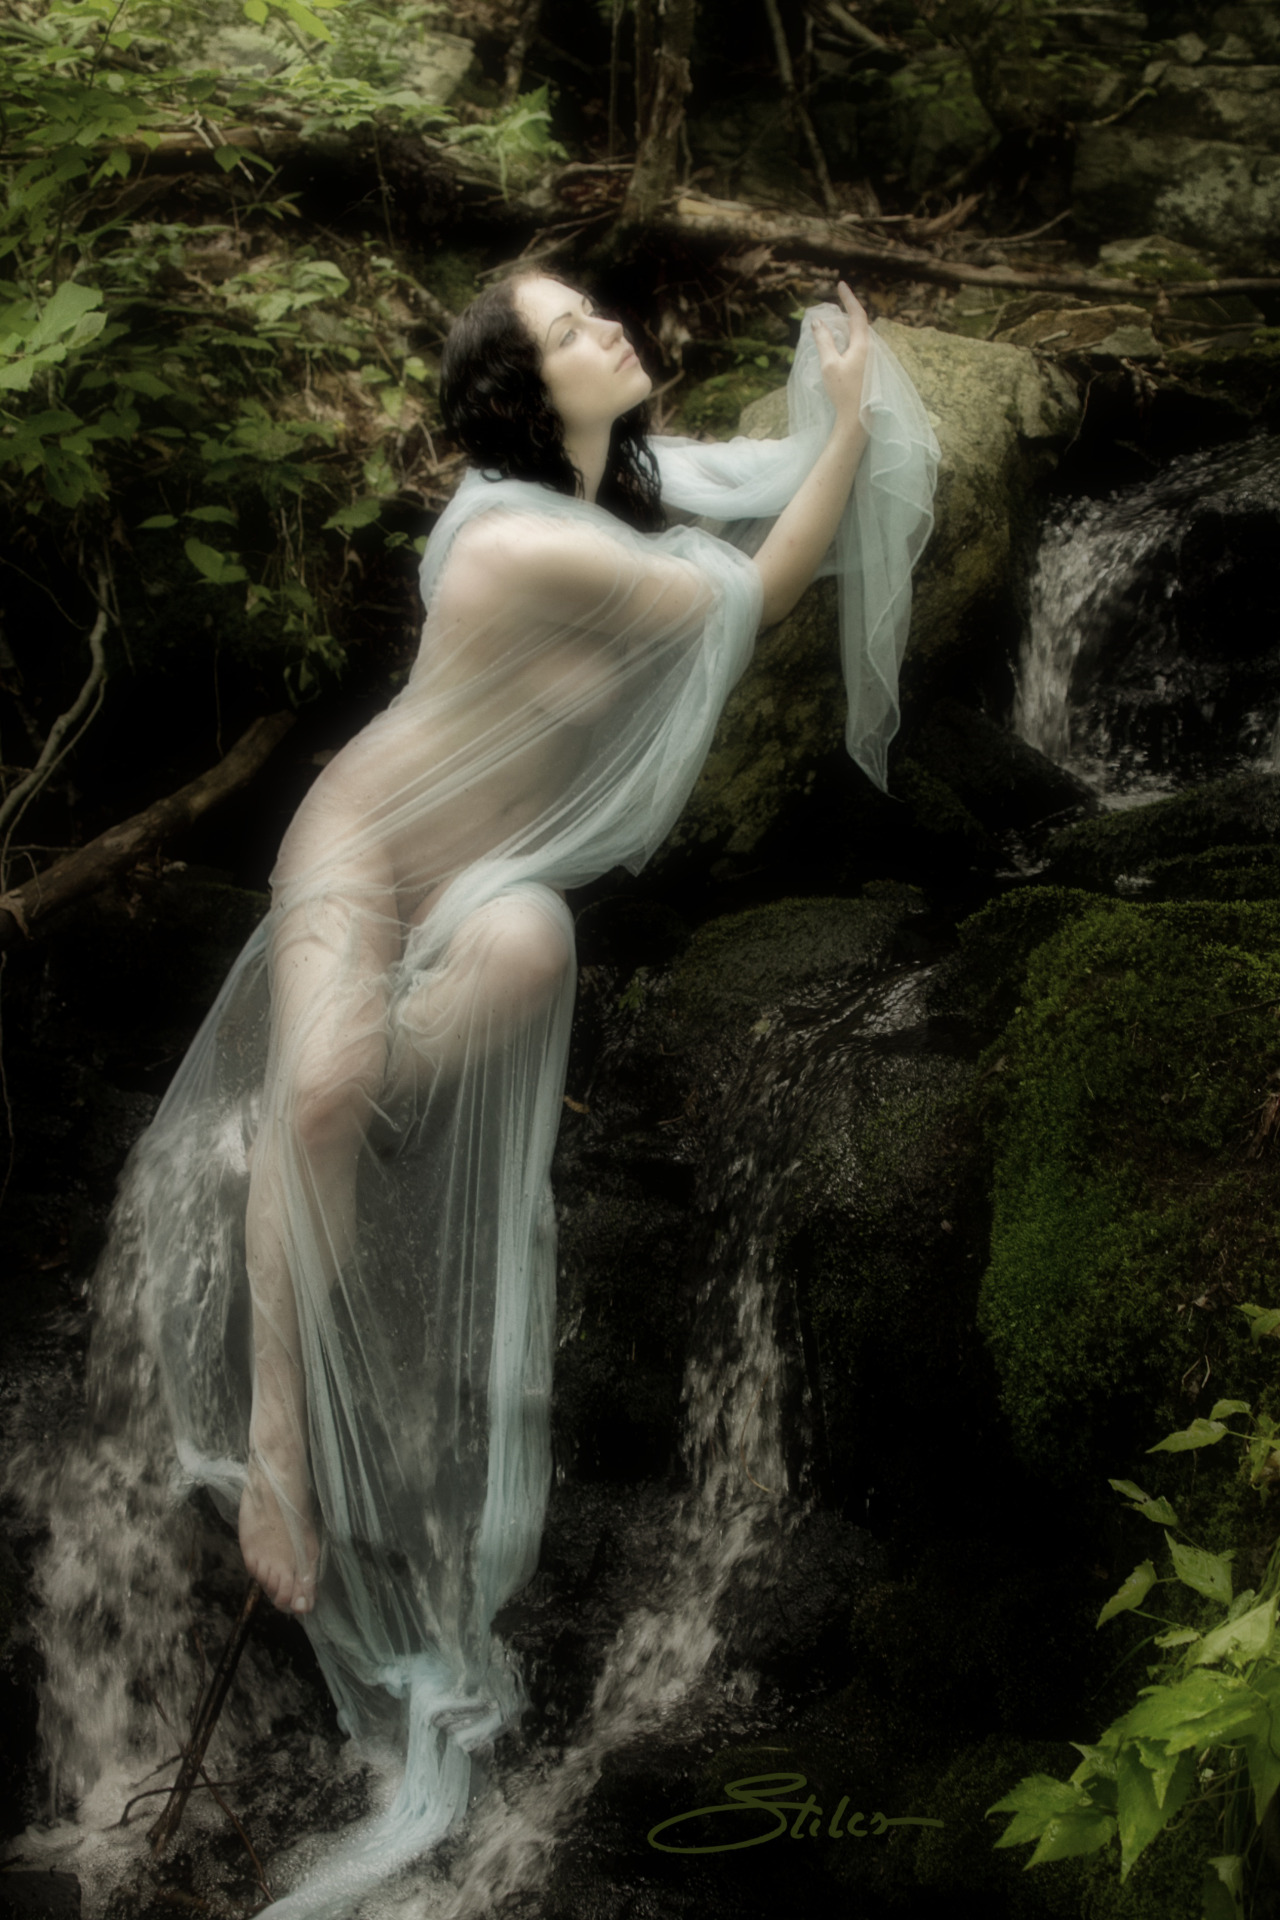 kjstiles: ‘Enchanted Falls’ with Melantha Cassytha…by Kevin Stiles. (please